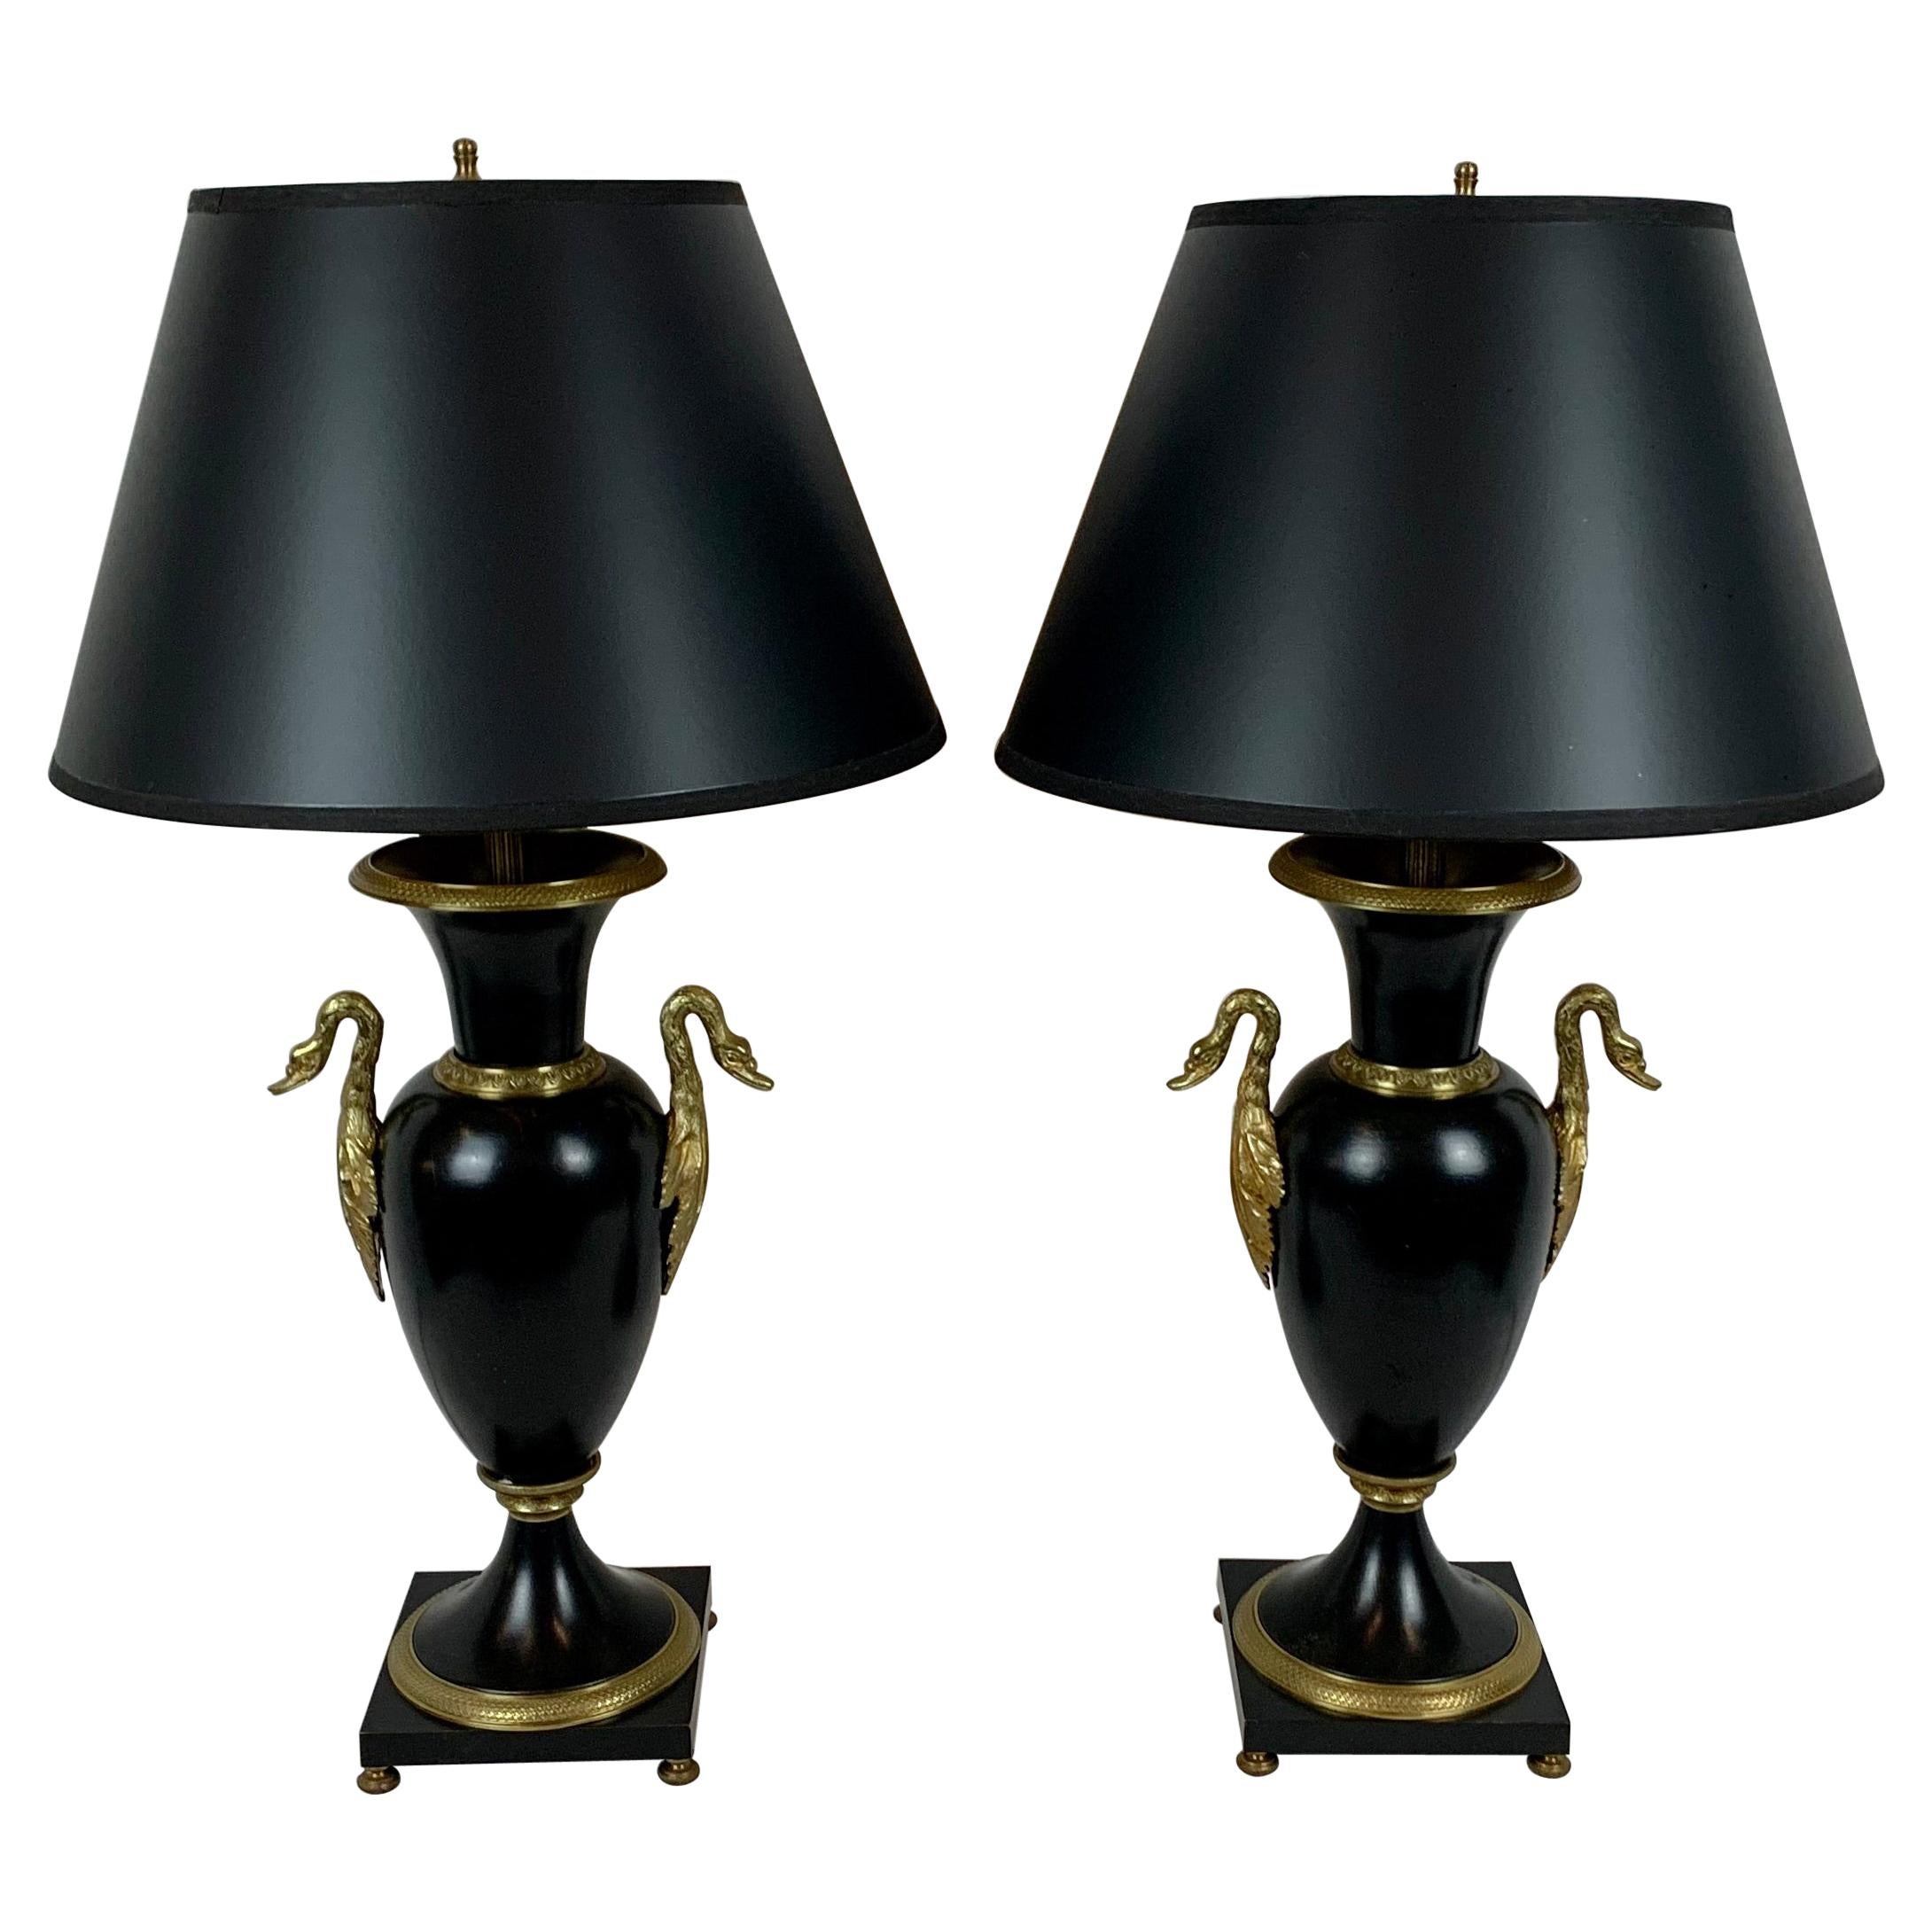 A Pair of French Empire Black Enameled Lamps with Gilt Bronze Trim